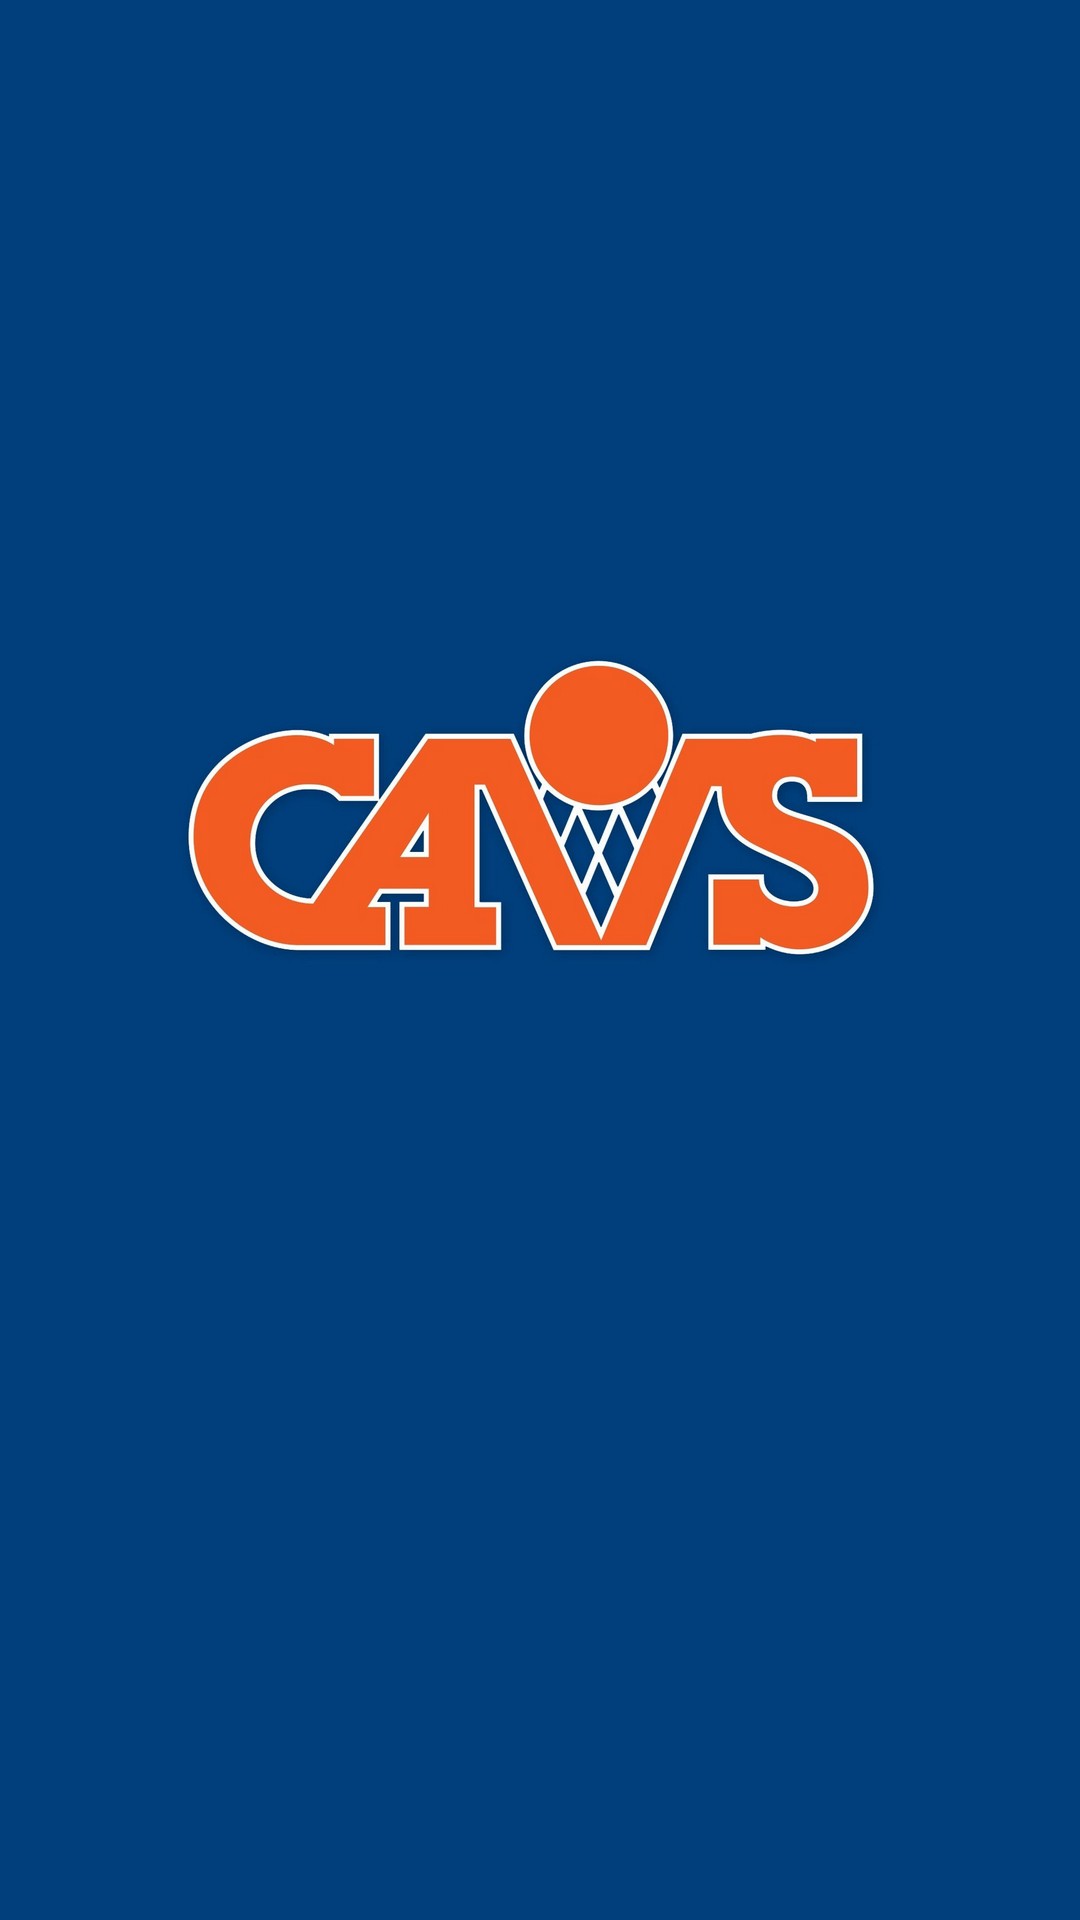 cleveland cavaliers wallpaper for android,blue,text,orange,font,logo